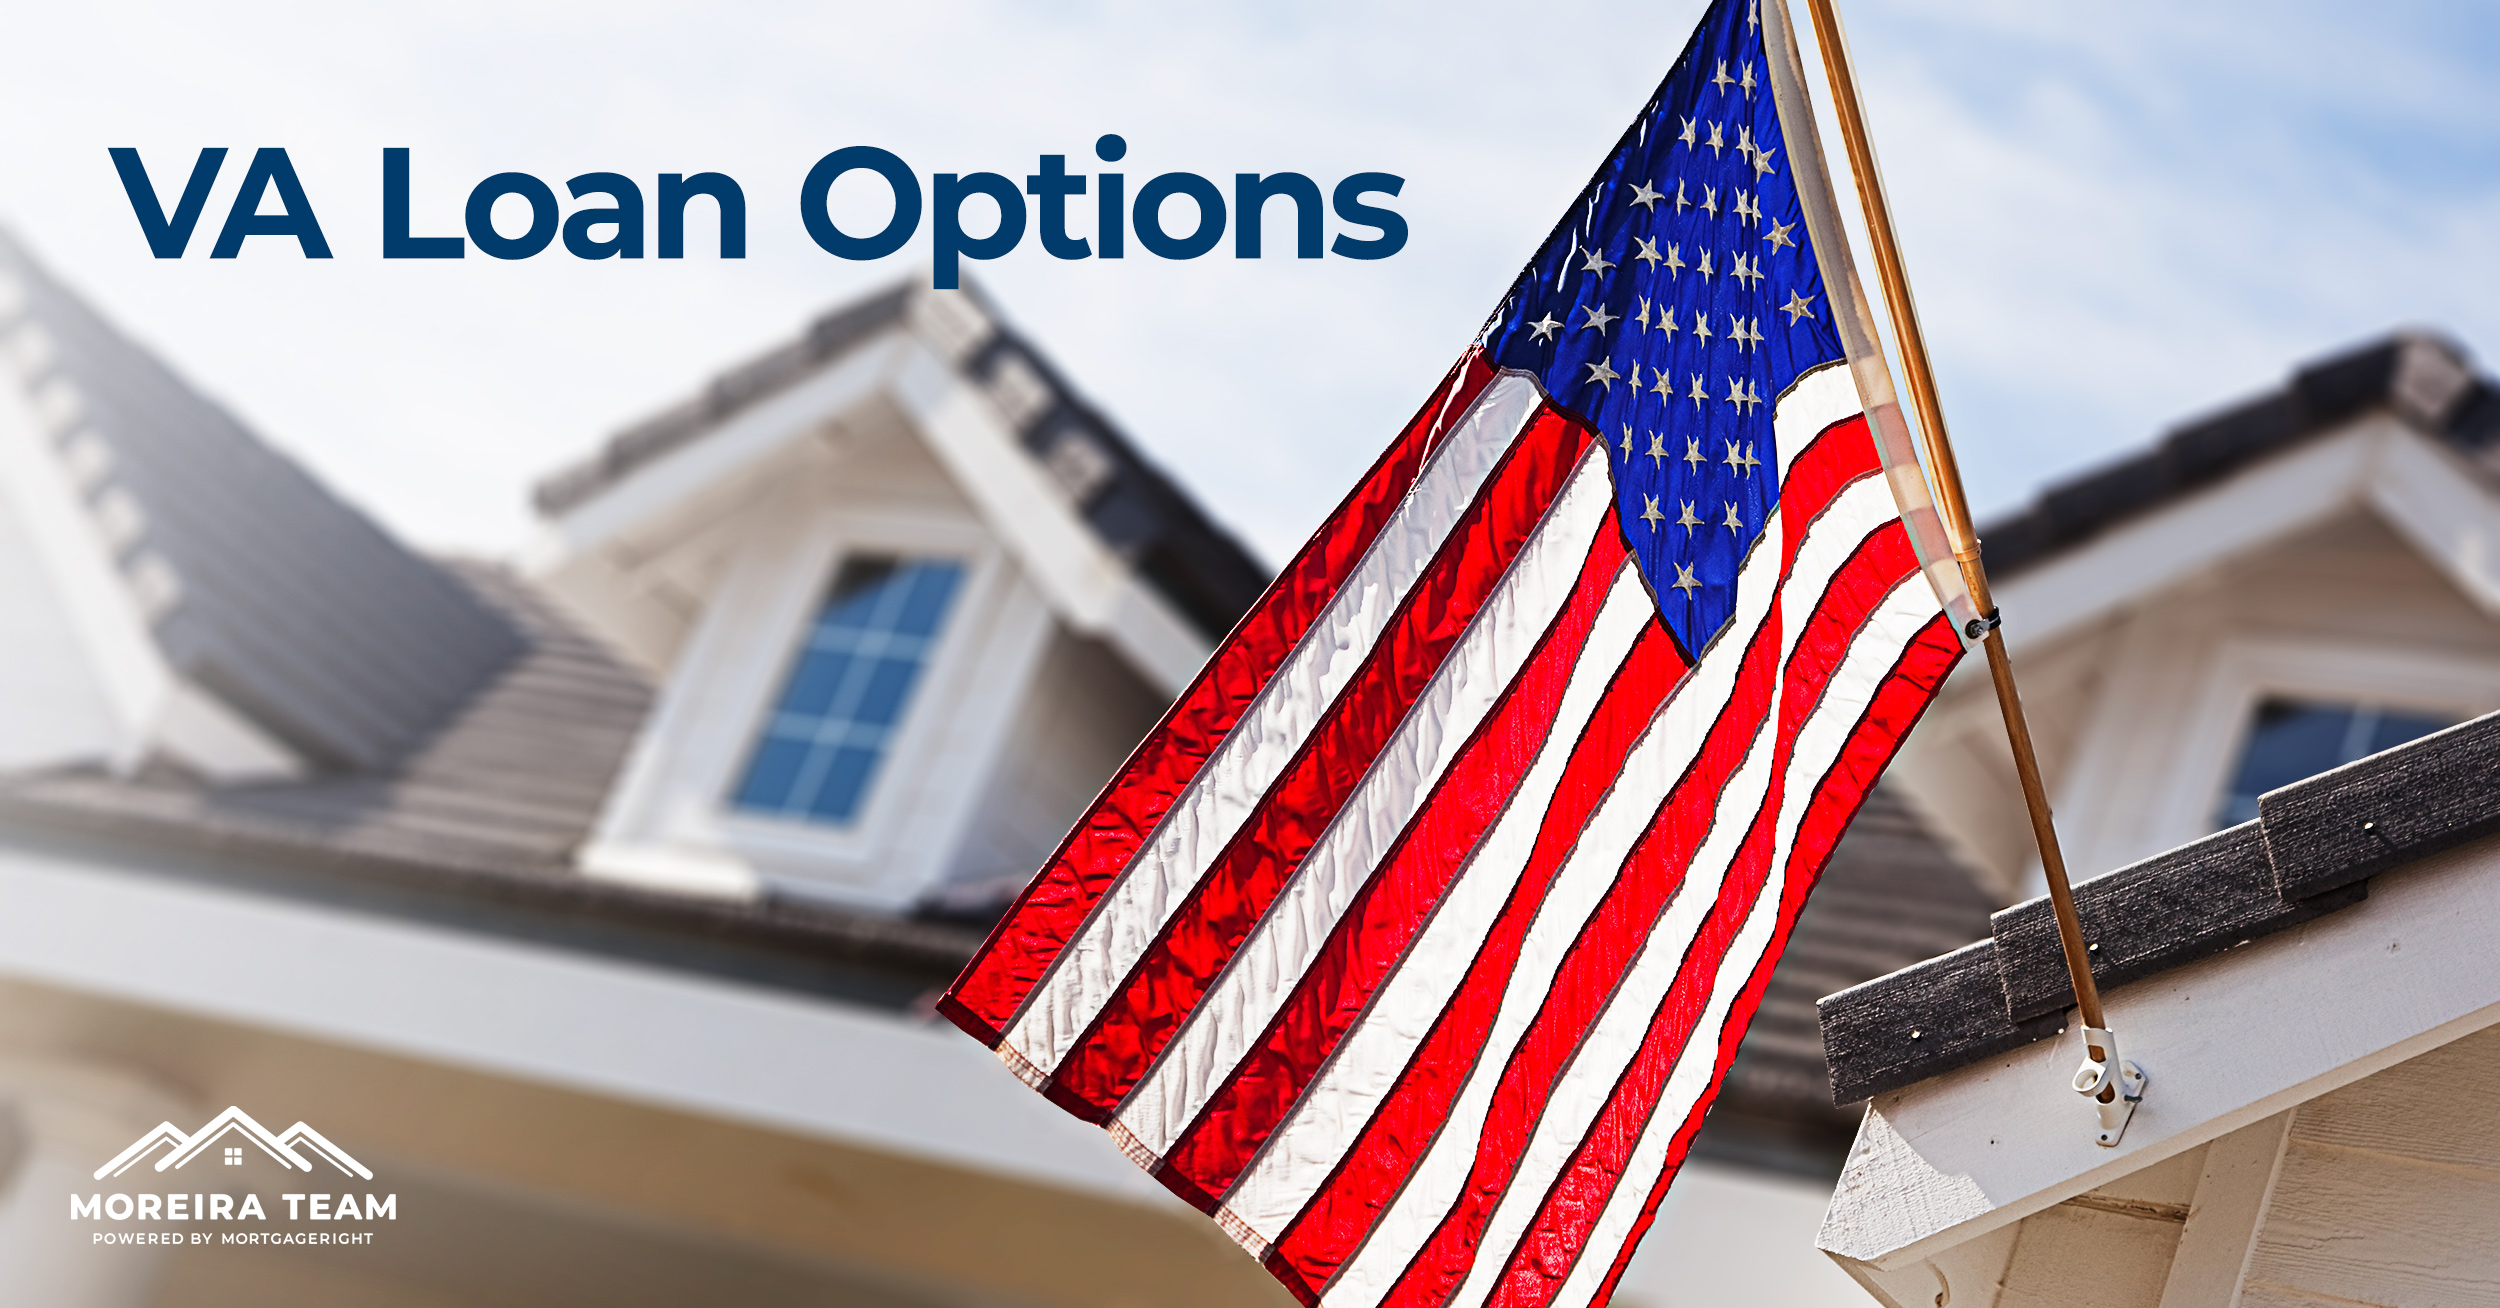 What are the Major Types of VA Loans?